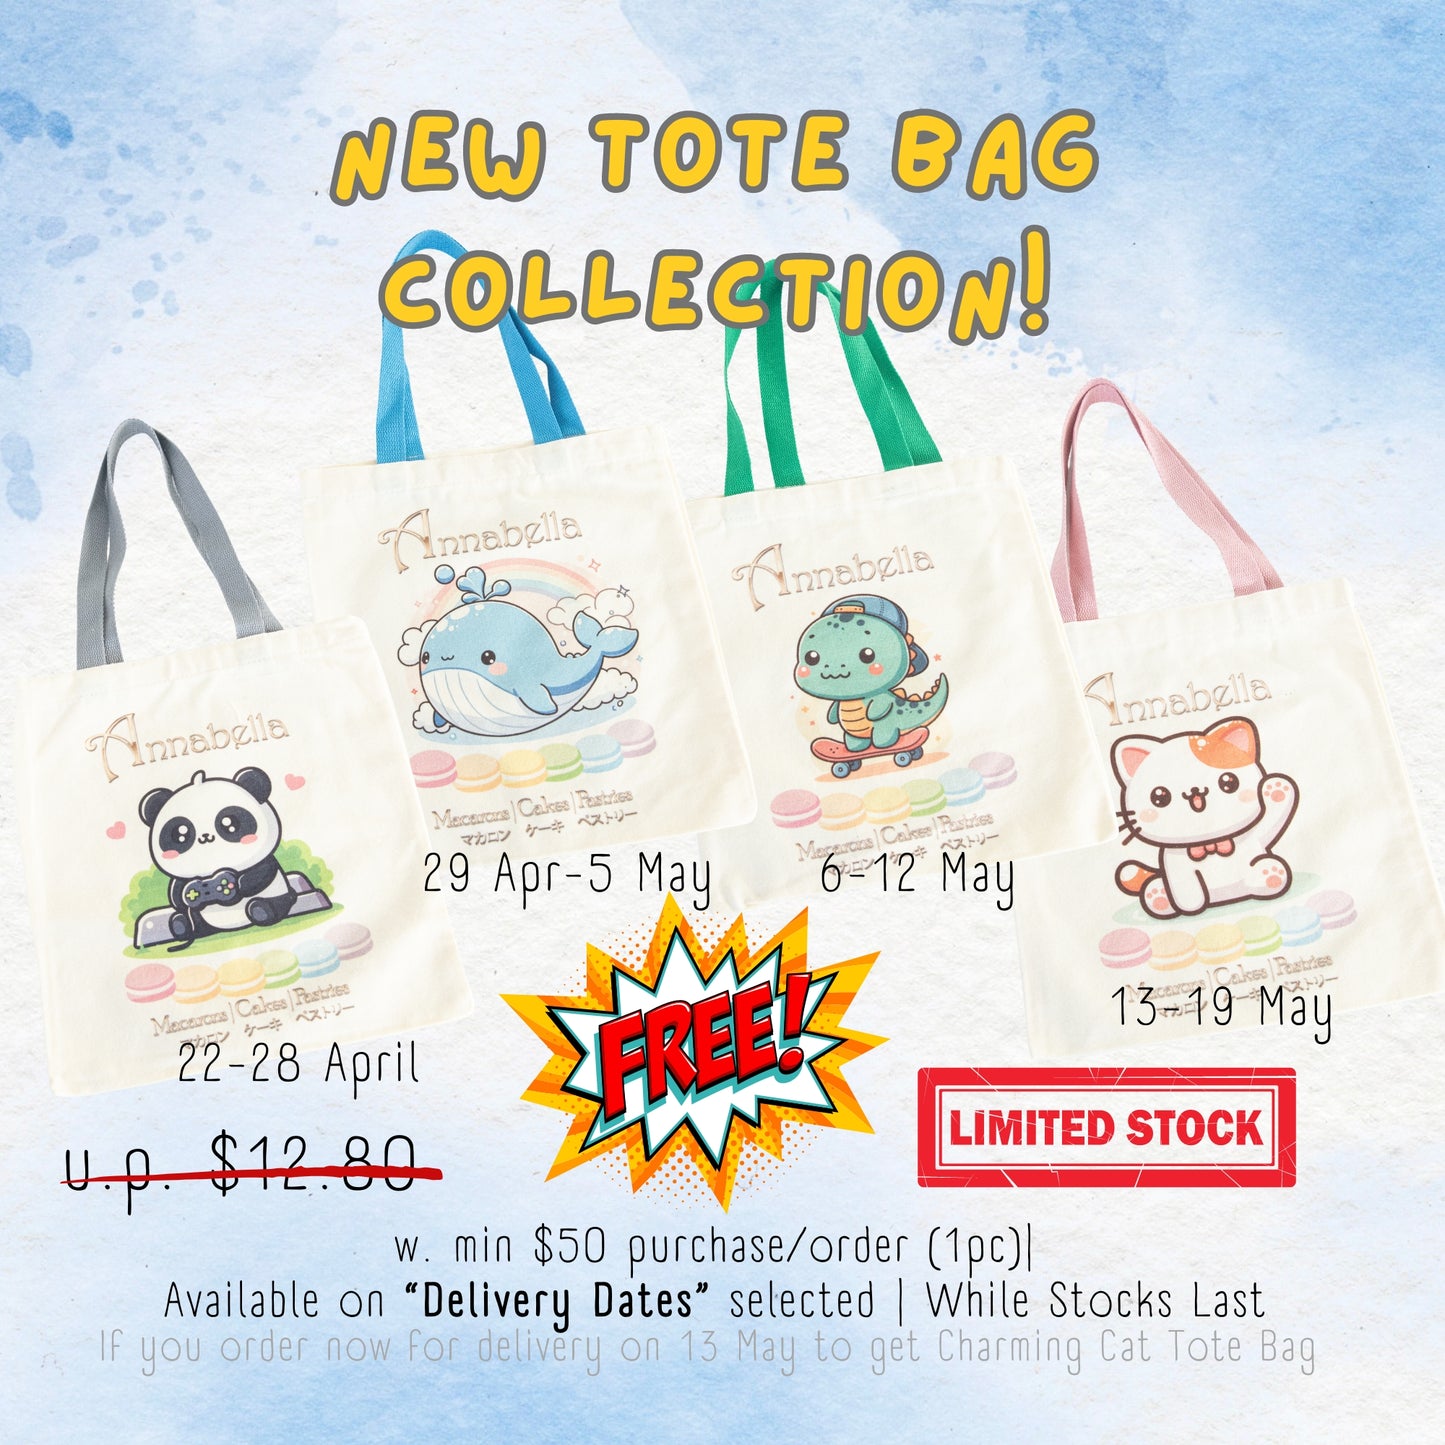 Tote Bag Size (32cmx36cm) - Charming Cat [Delivery Date 13 - 19 May]